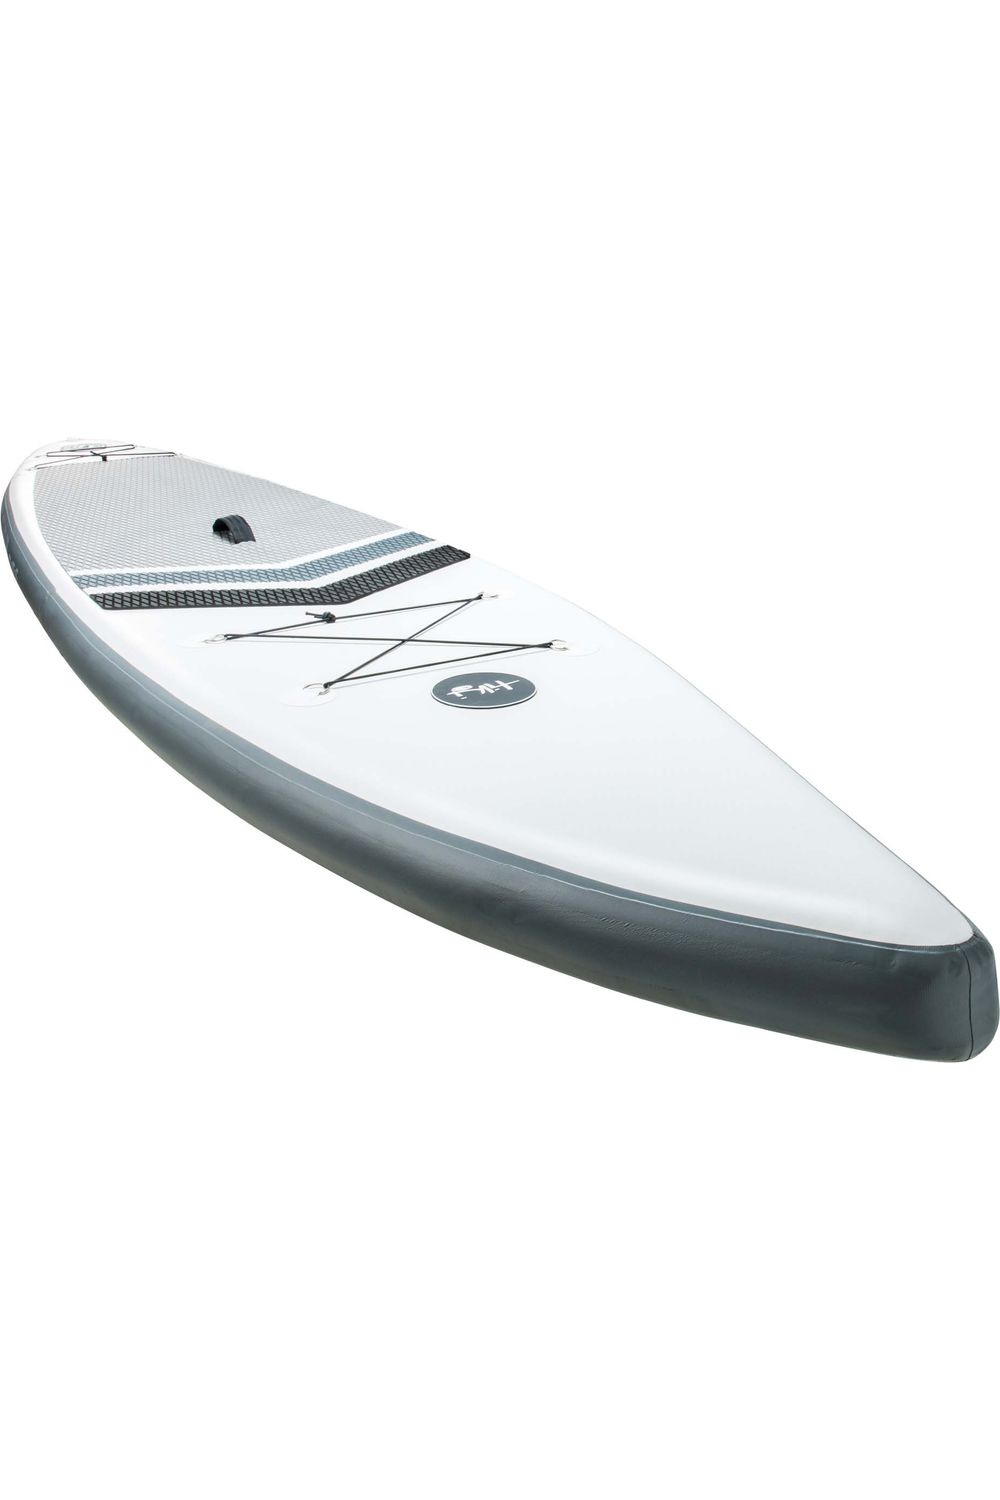 12'6 Stowaway Rambler Inflatable SUP + Accessories Pack